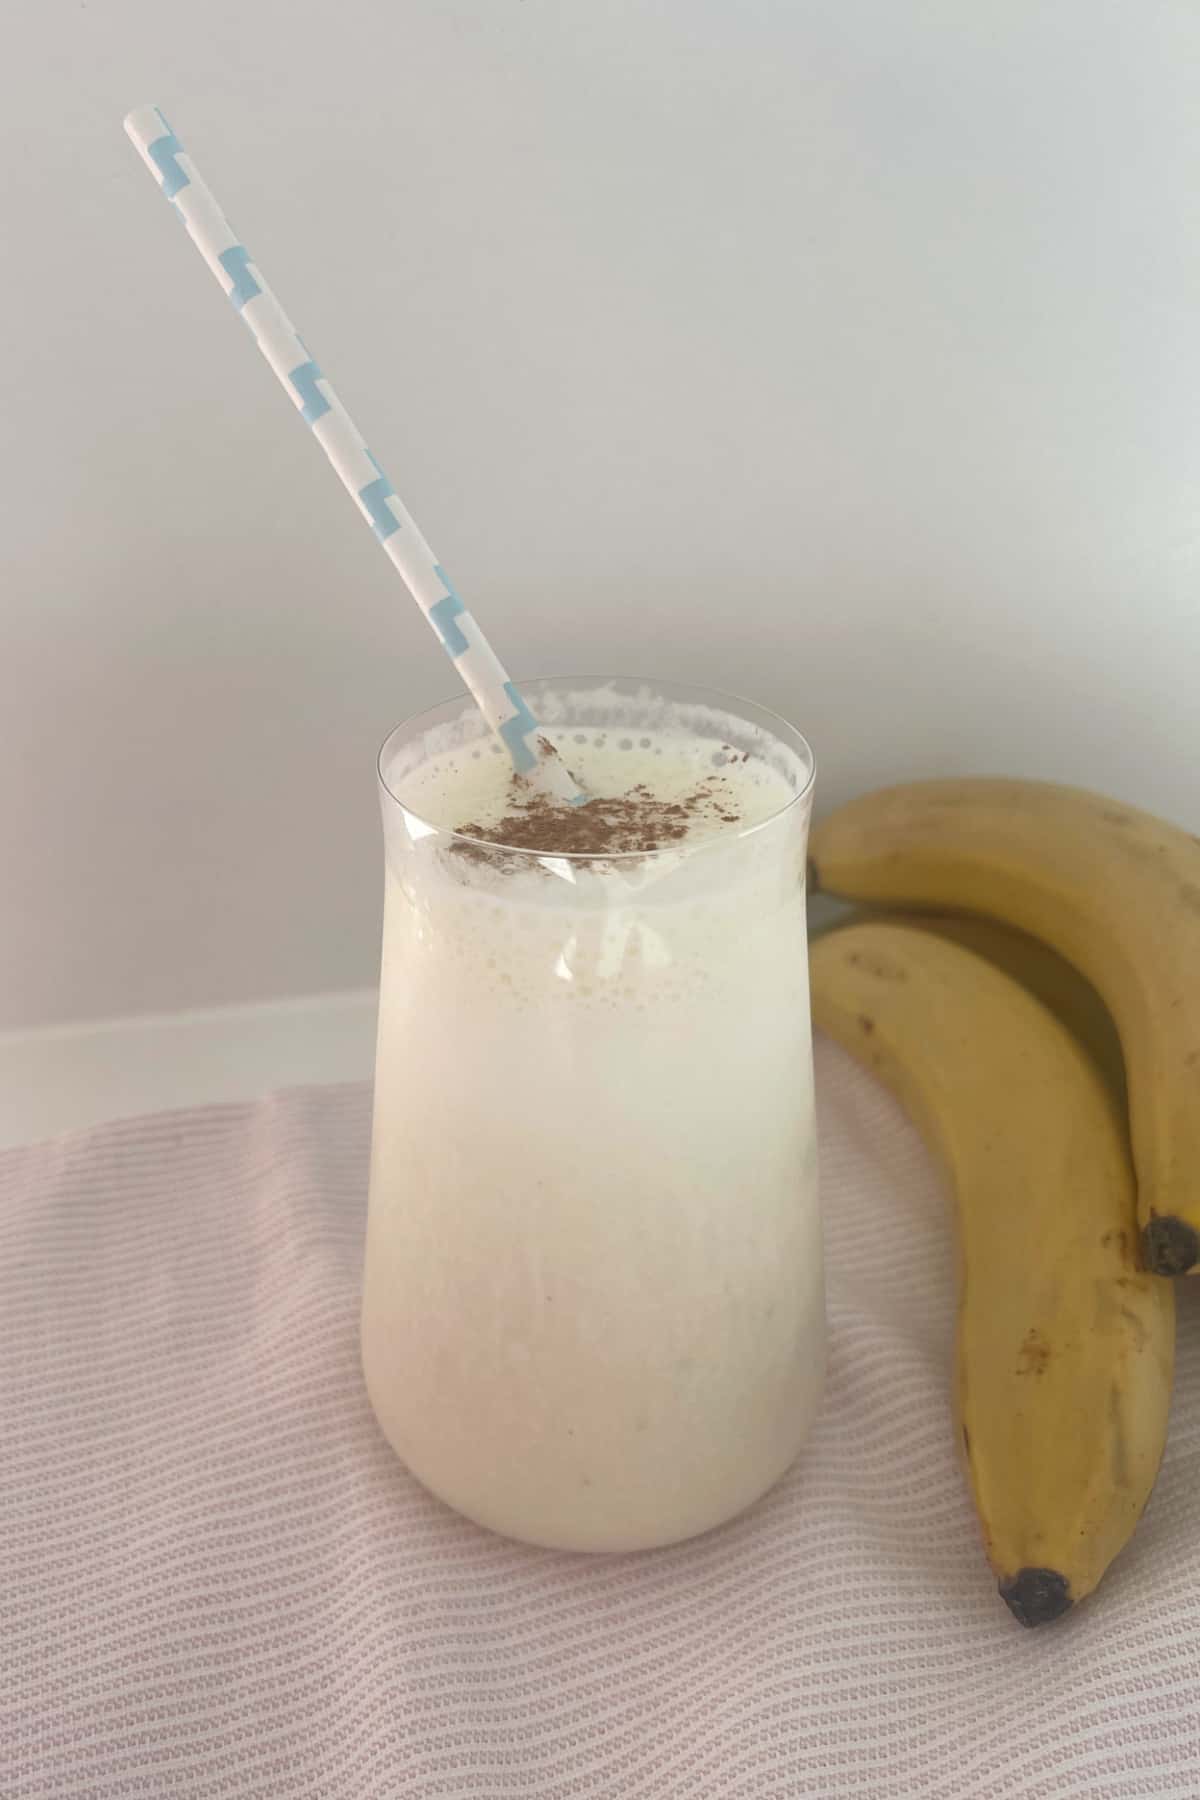 Banana smoothie in a tall glass sitting on a pink towel with a blue striped straw in glass.